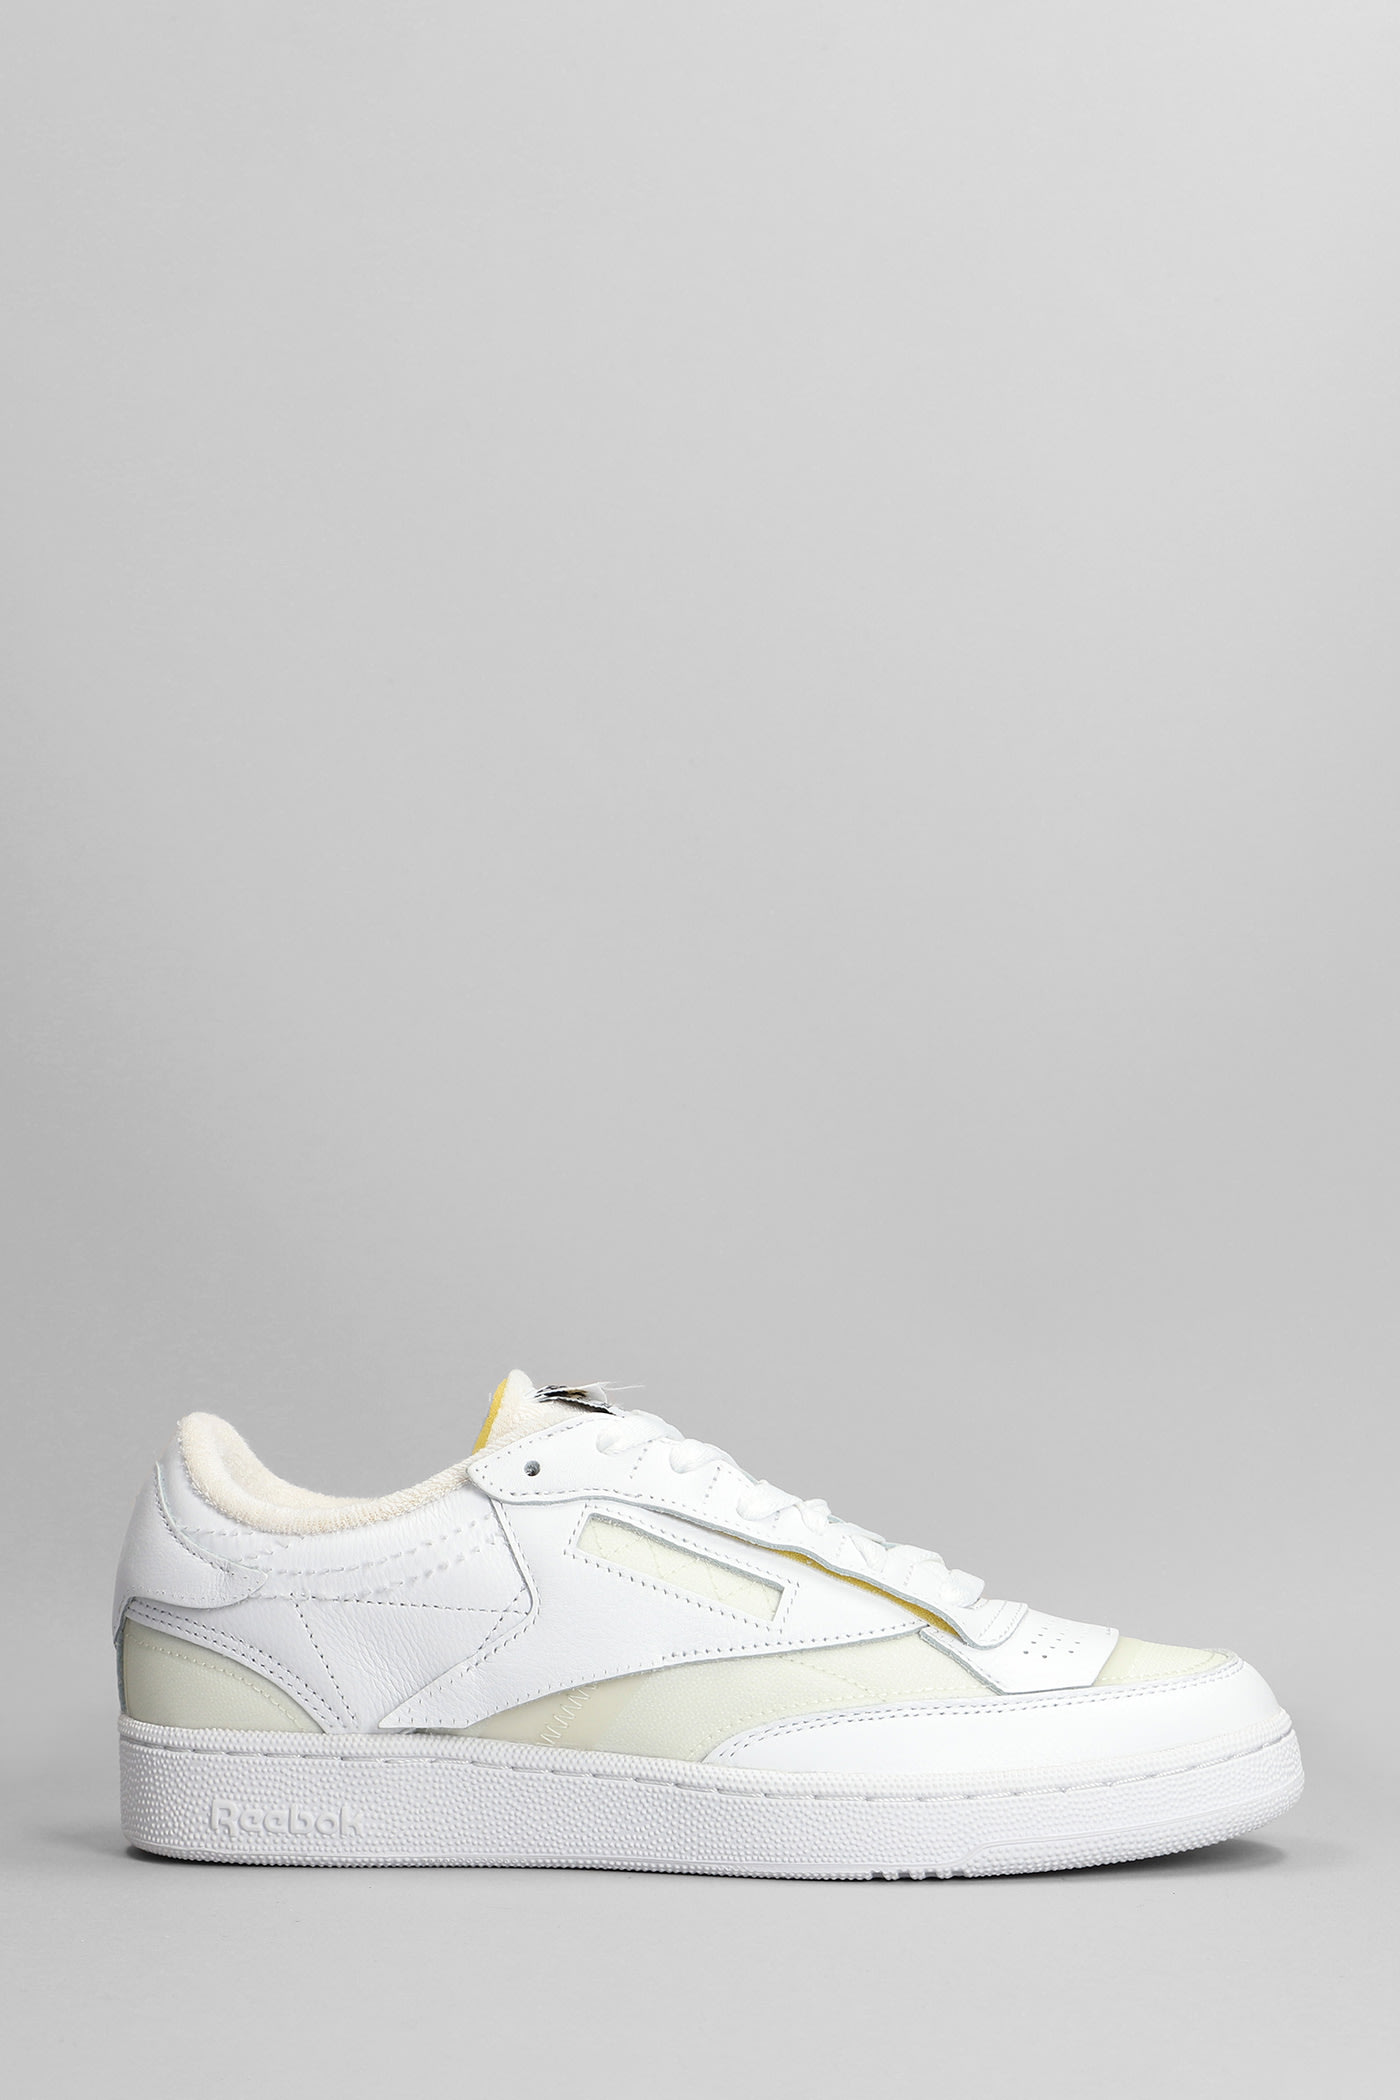 Maison Margiela Sneakers In White Leather And Fabric